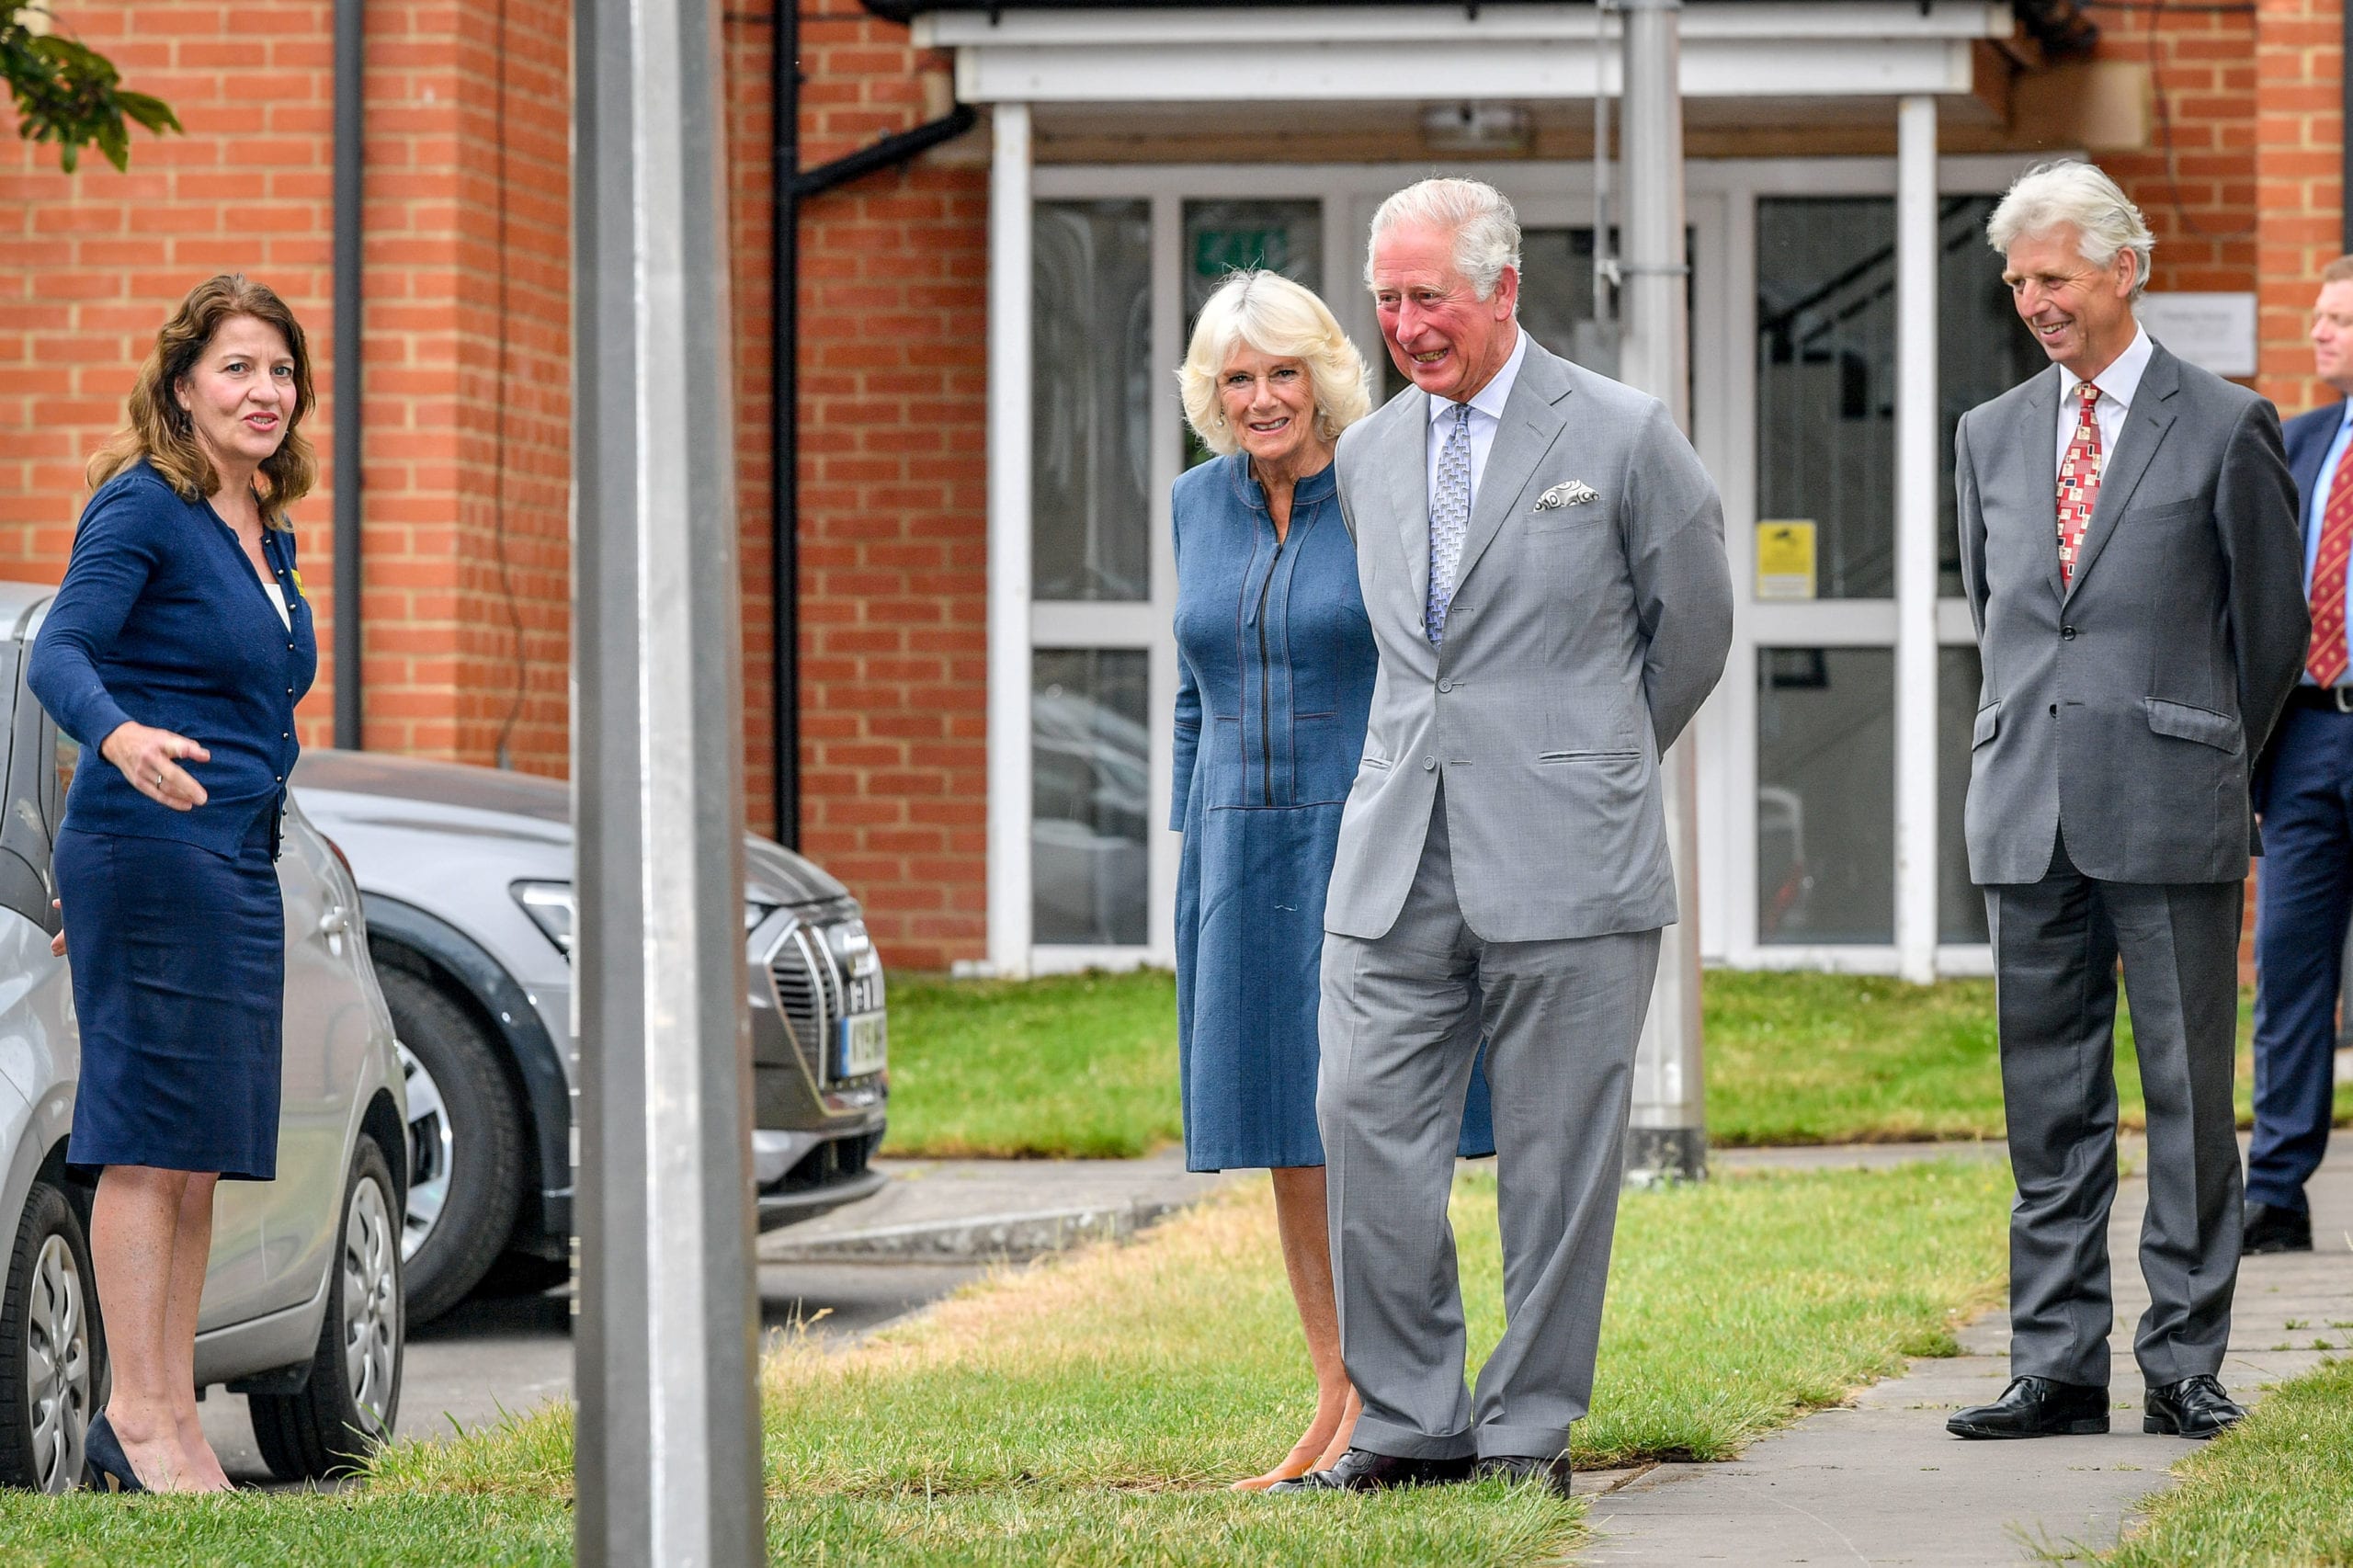 Britain's Charles, Prince of Wales and Camilla, Duchess of Cornwall arrive as they meet with workers who have responded to the coronavirus disease (COVID-19) outbreak, at Gloucestershire Royal Hospital, in Gloucester, Britain June 16, 2020. Ben Birchall/Pool via REUTERS